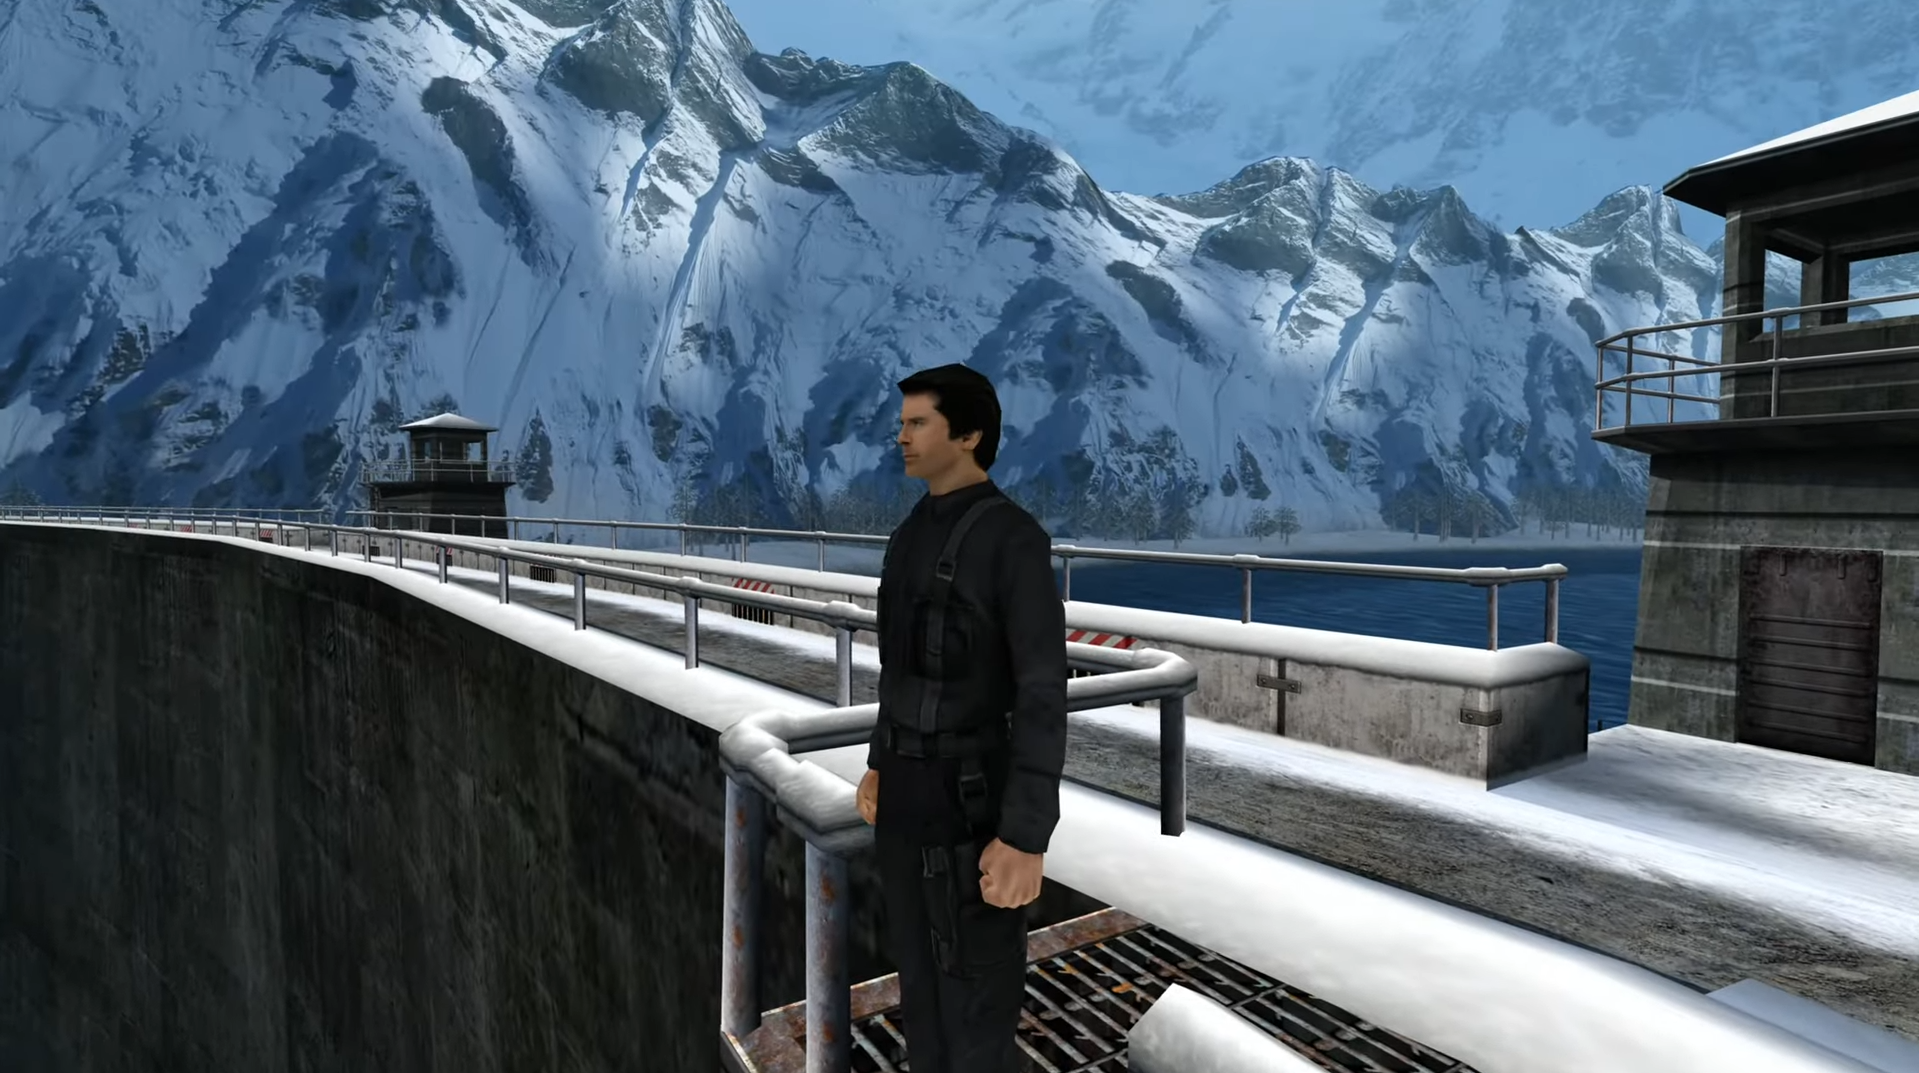 GoldenEye Xbox Remaster Leaks, Is Fully Playable On PC - GameSpot